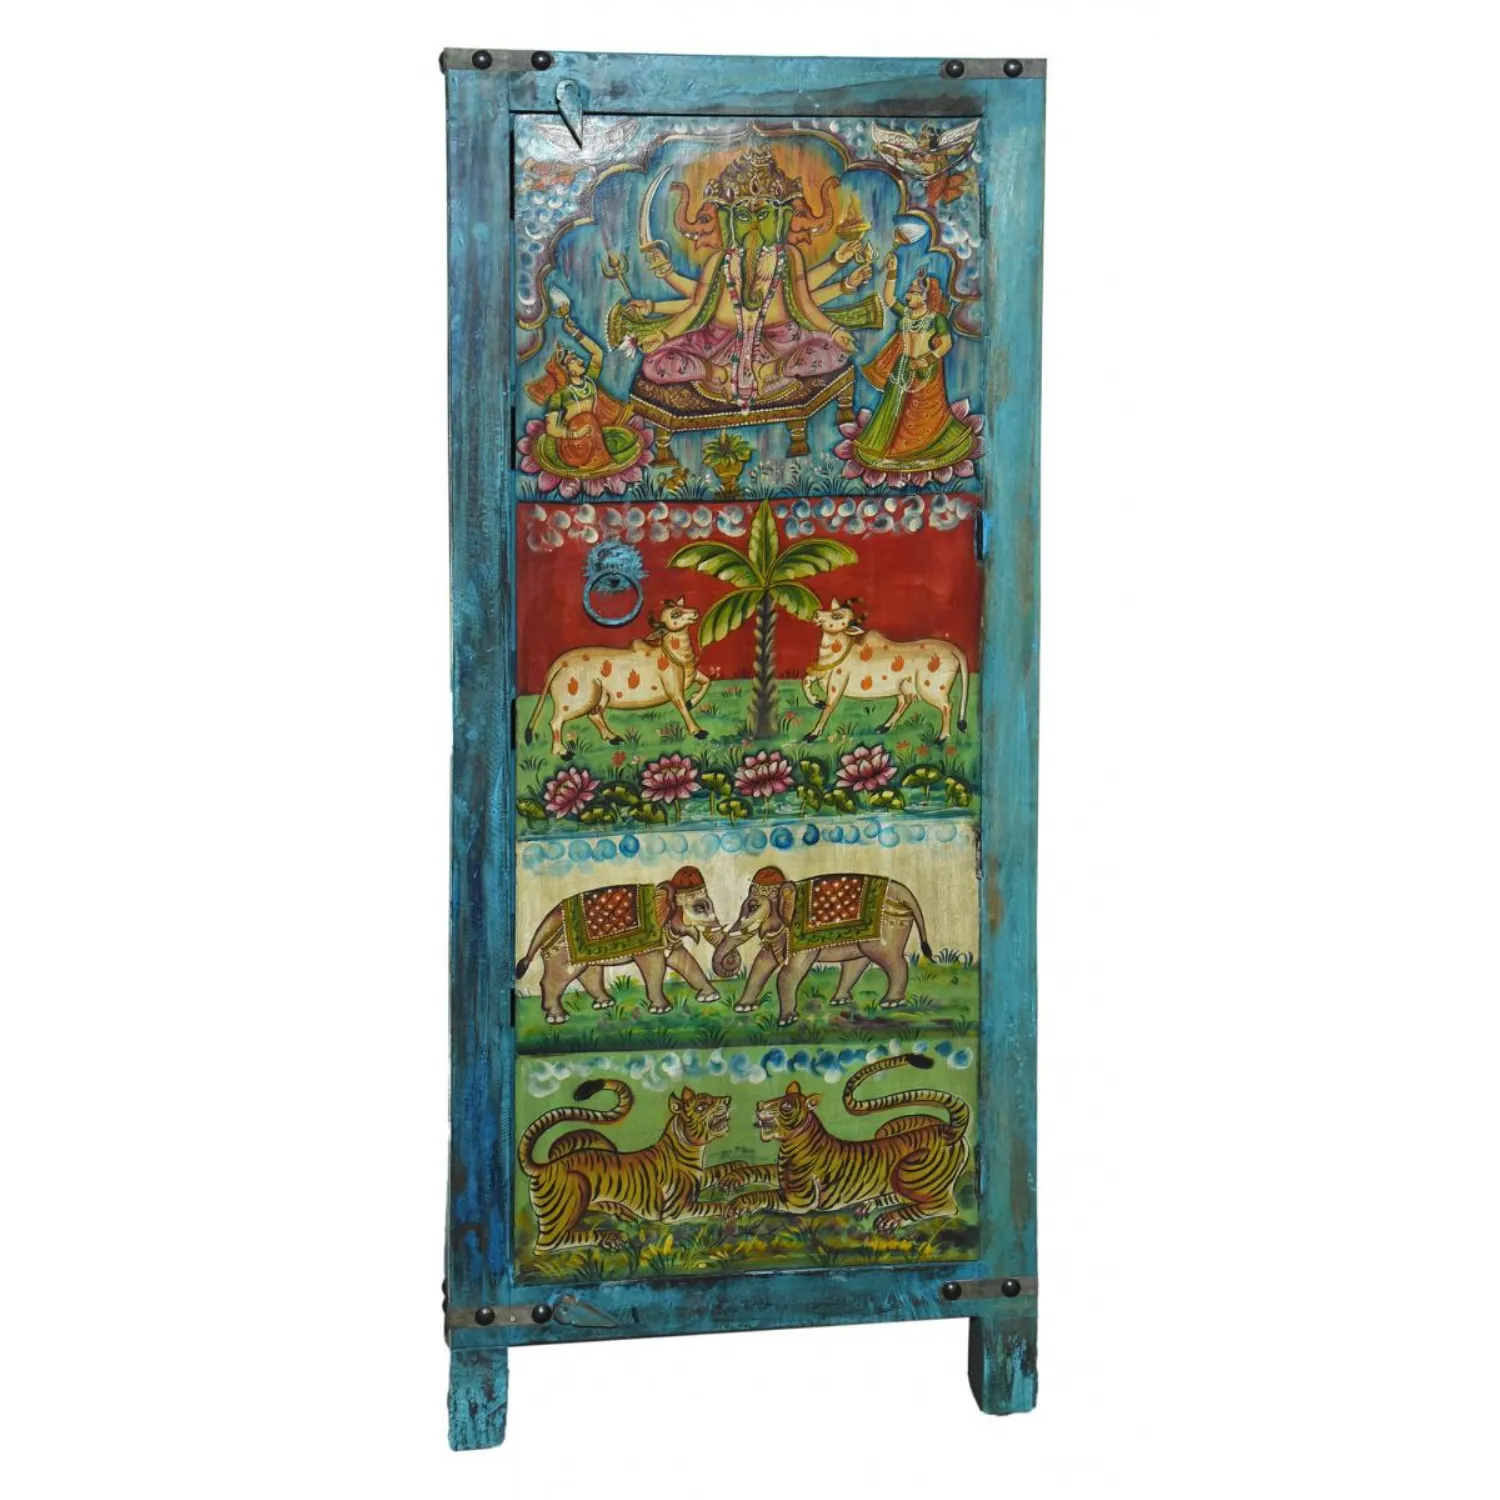 Hand Painted Tall Cabinet